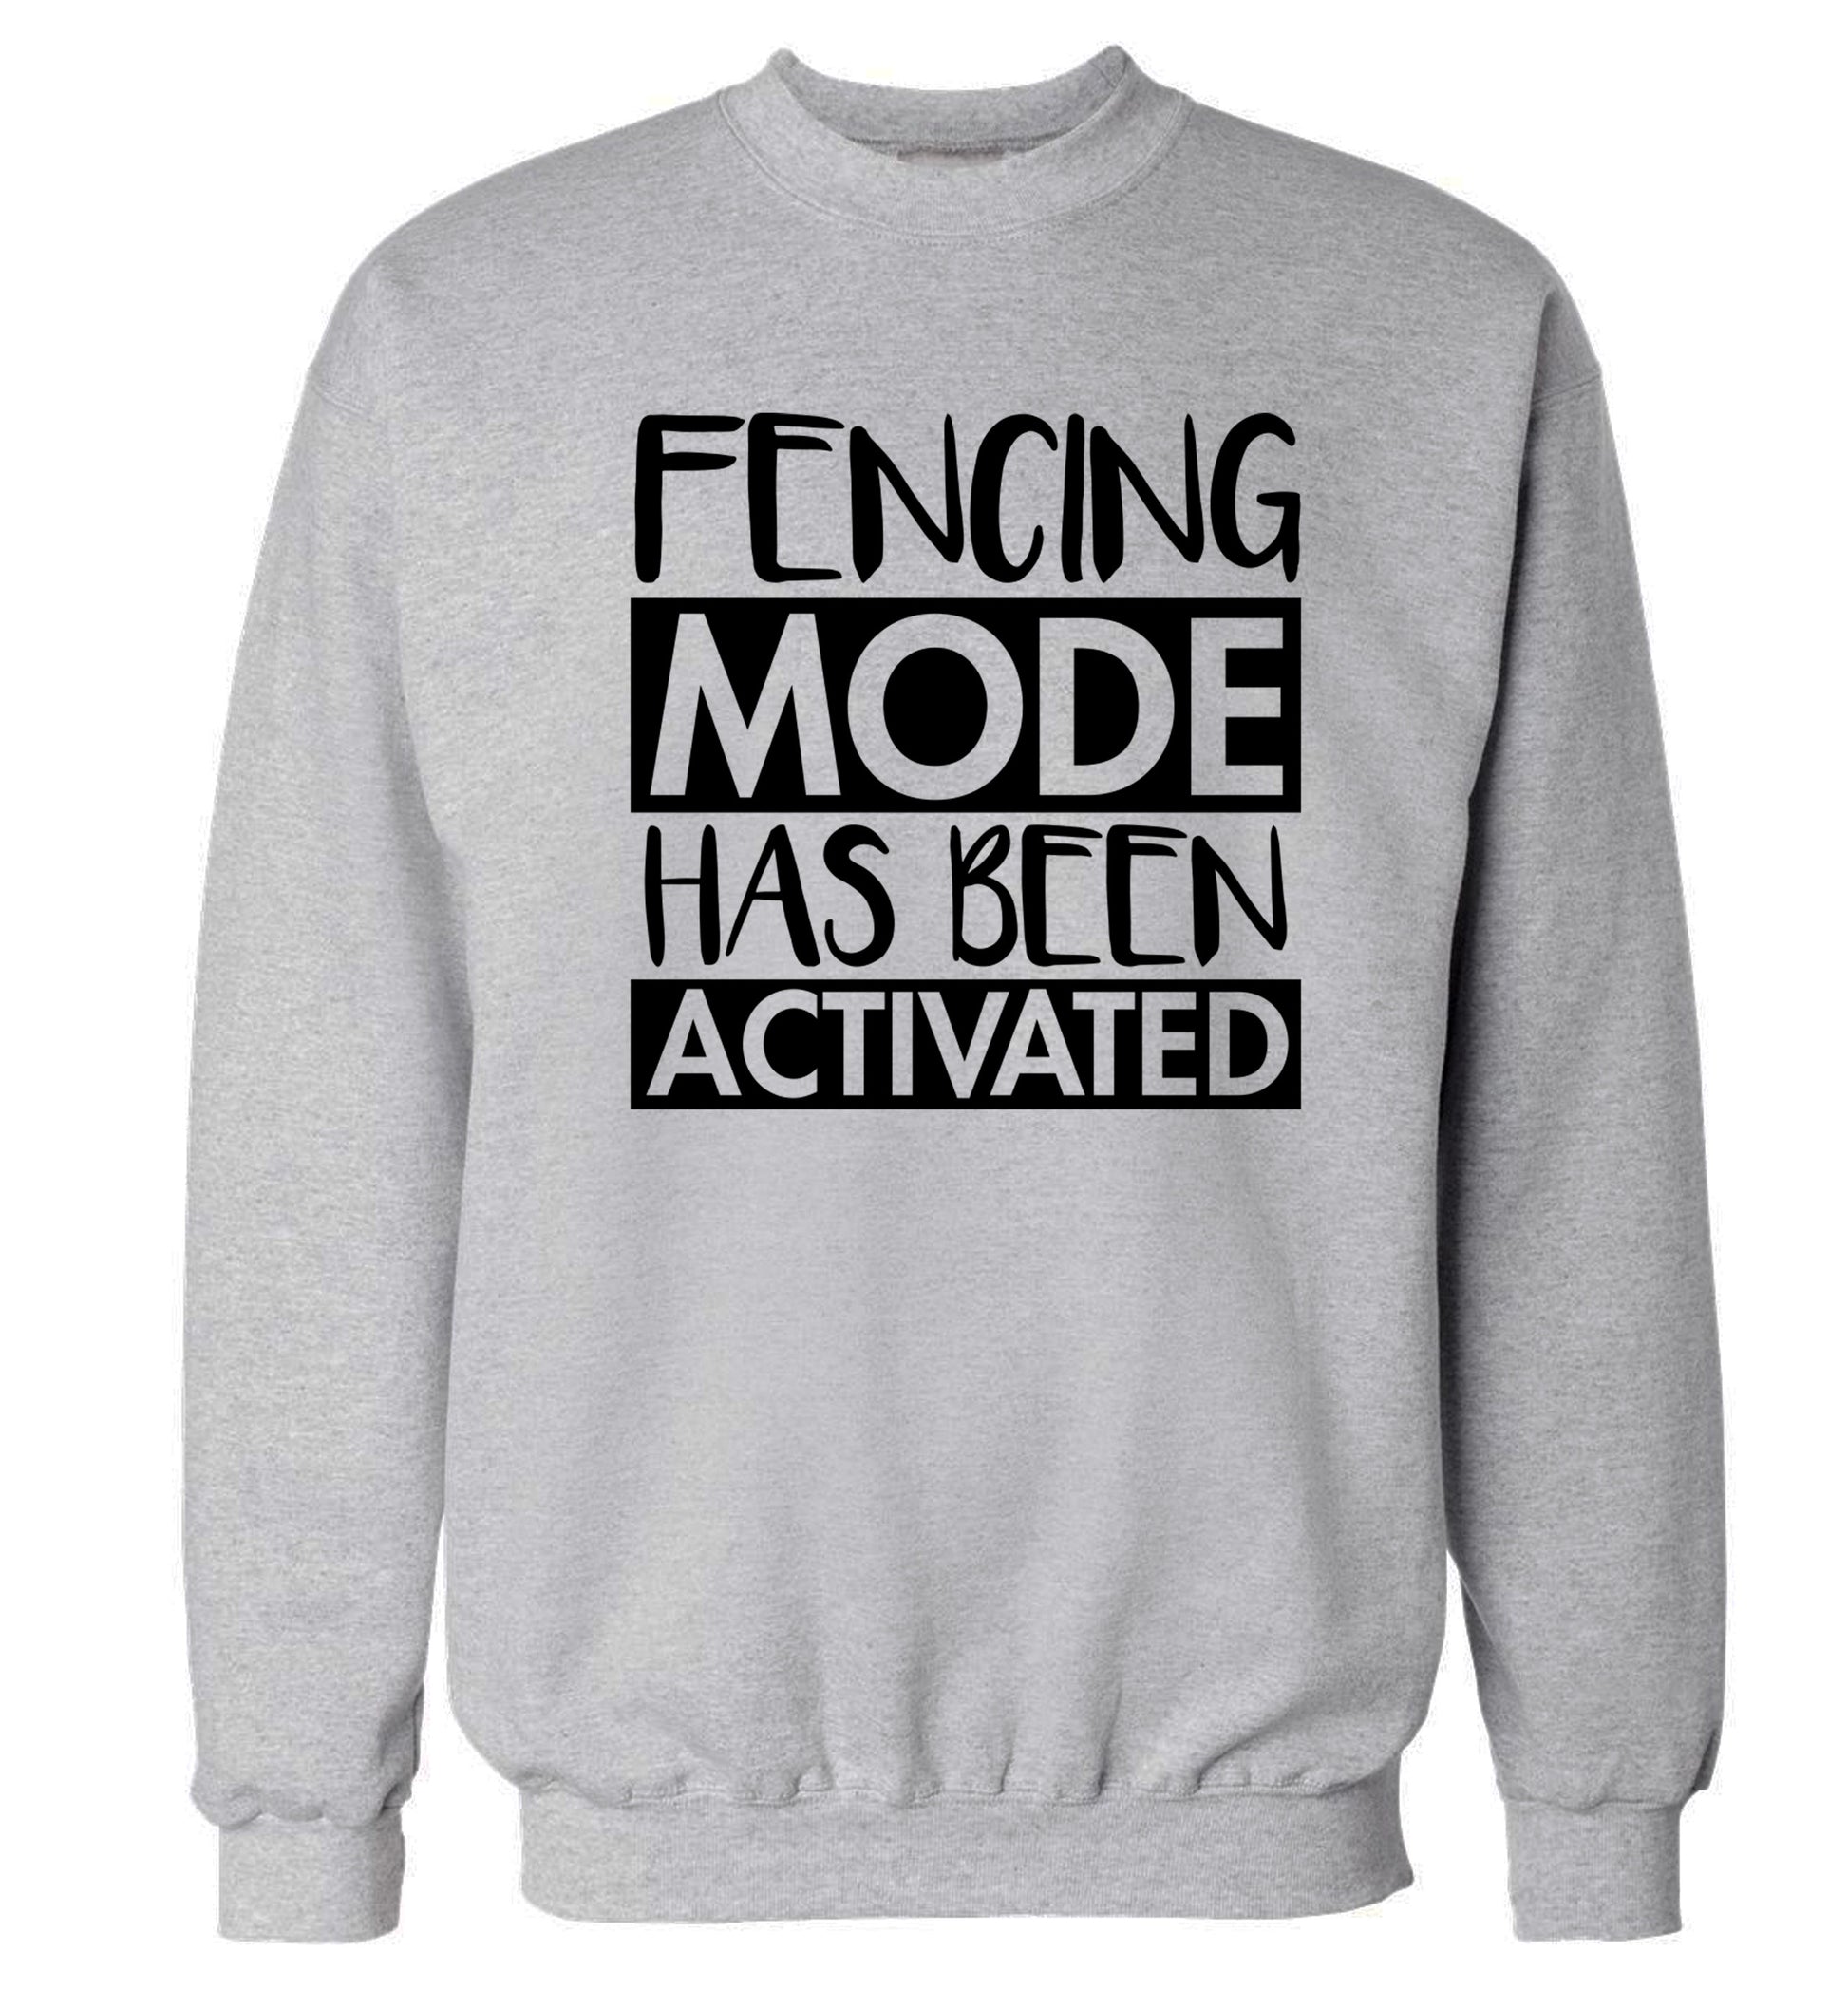 Fencing mode activated Adult's unisex grey Sweater 2XL